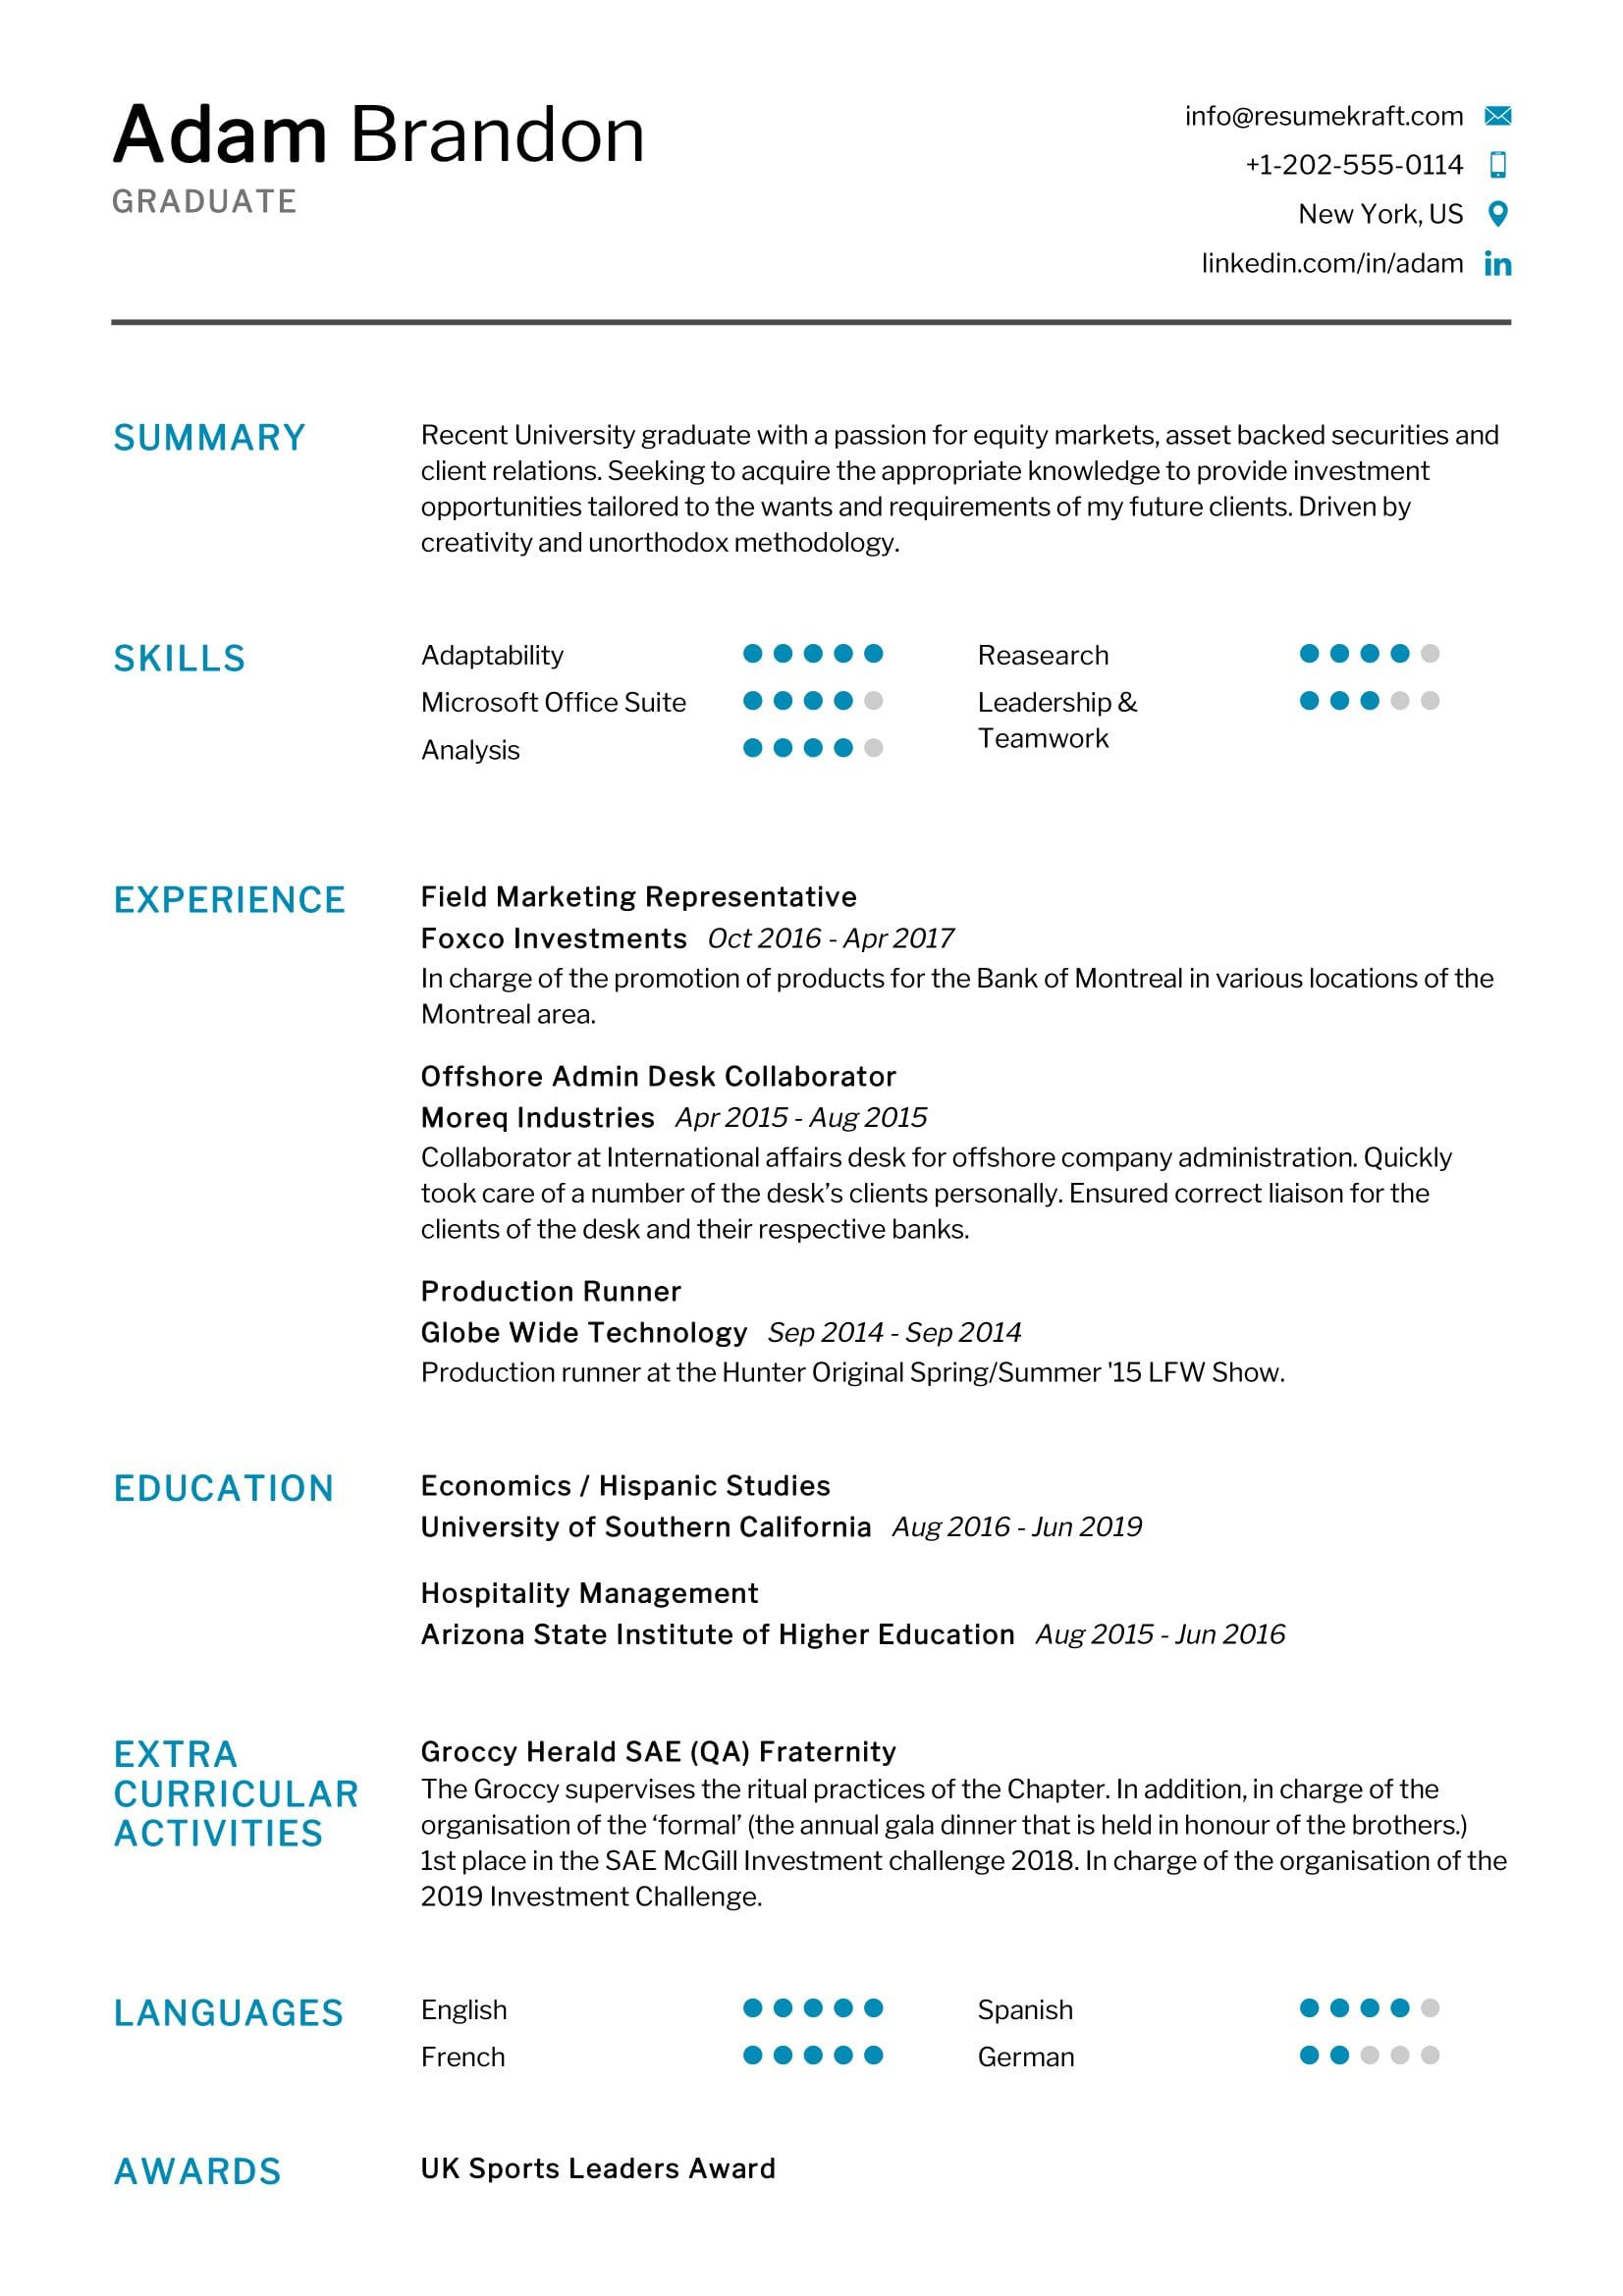 Resume Sample for Fresh Graduate without Experience Fresh Graduate Resume Sample 2021 Writing Tips – Resumekraft